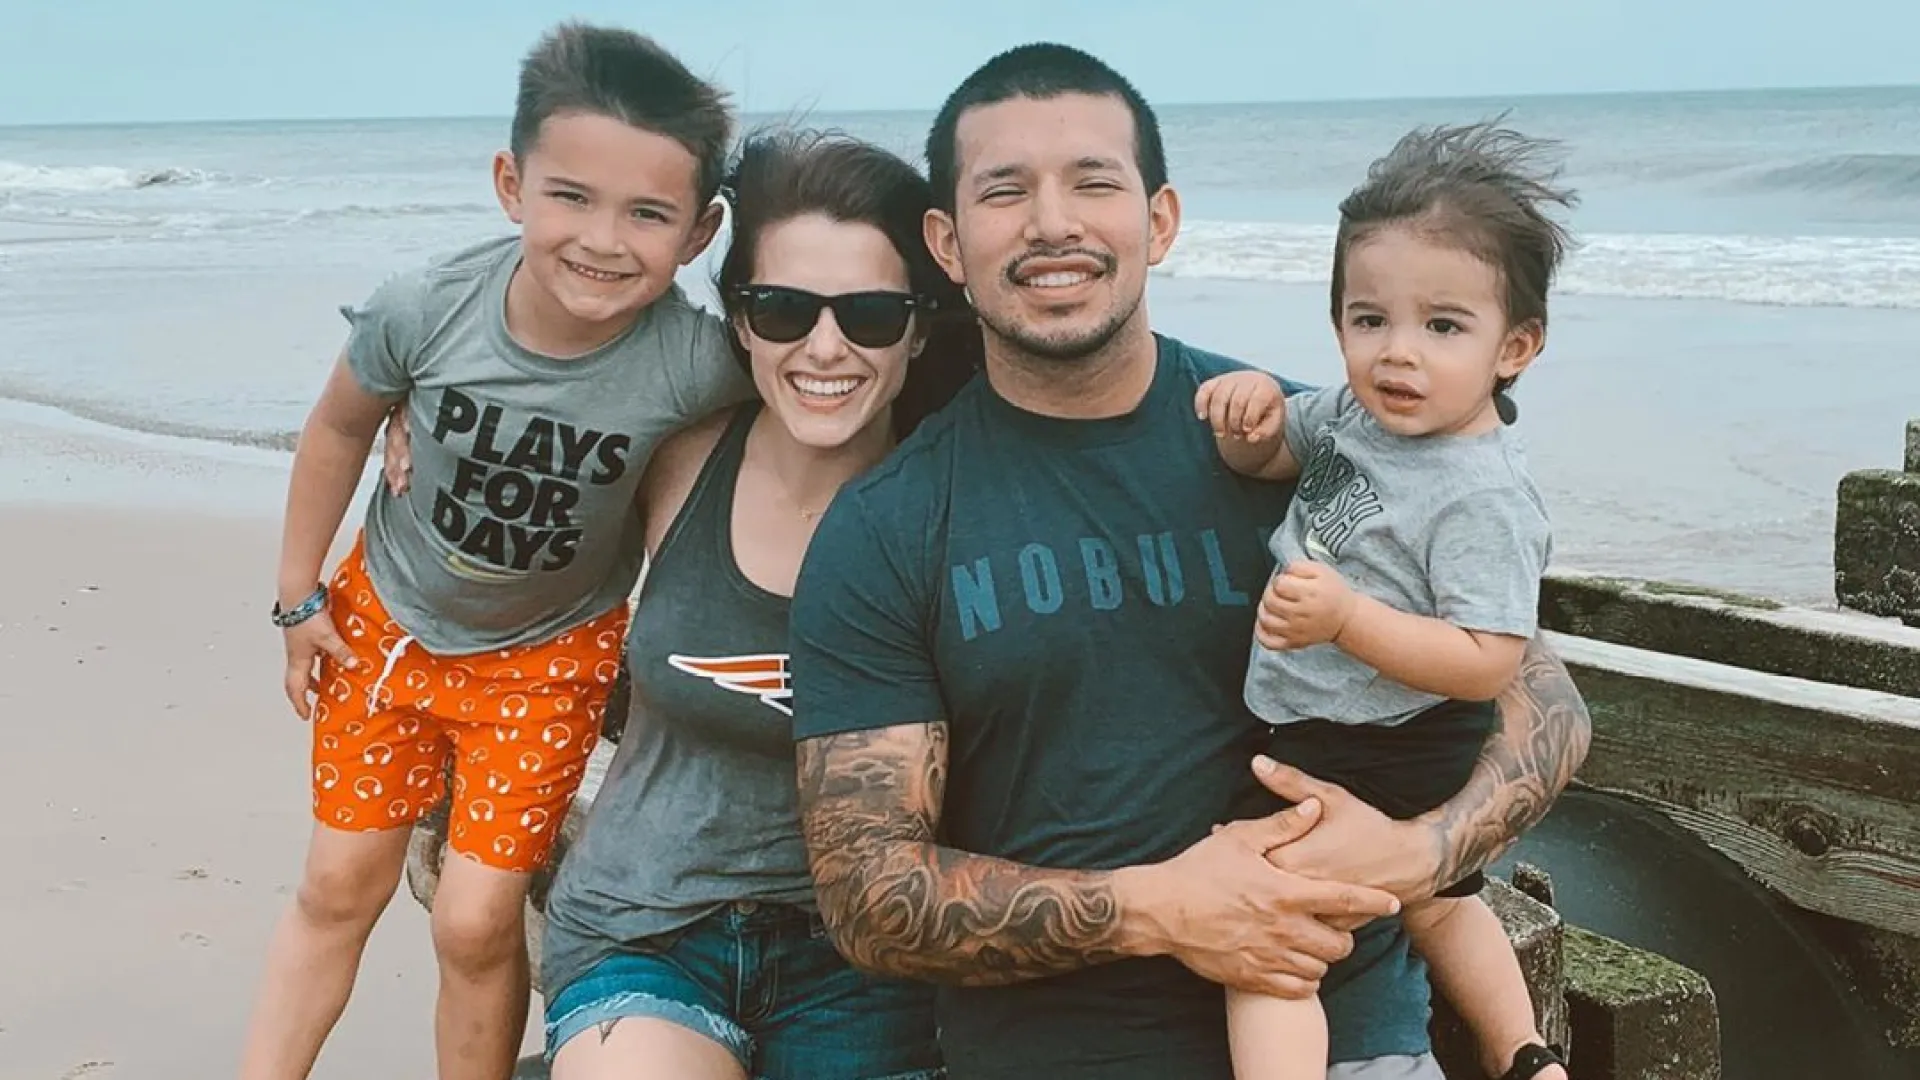 "Teen Mom’s" Javi Marroquin And Lauren Comeau Reunite For The First Time Since Their Split